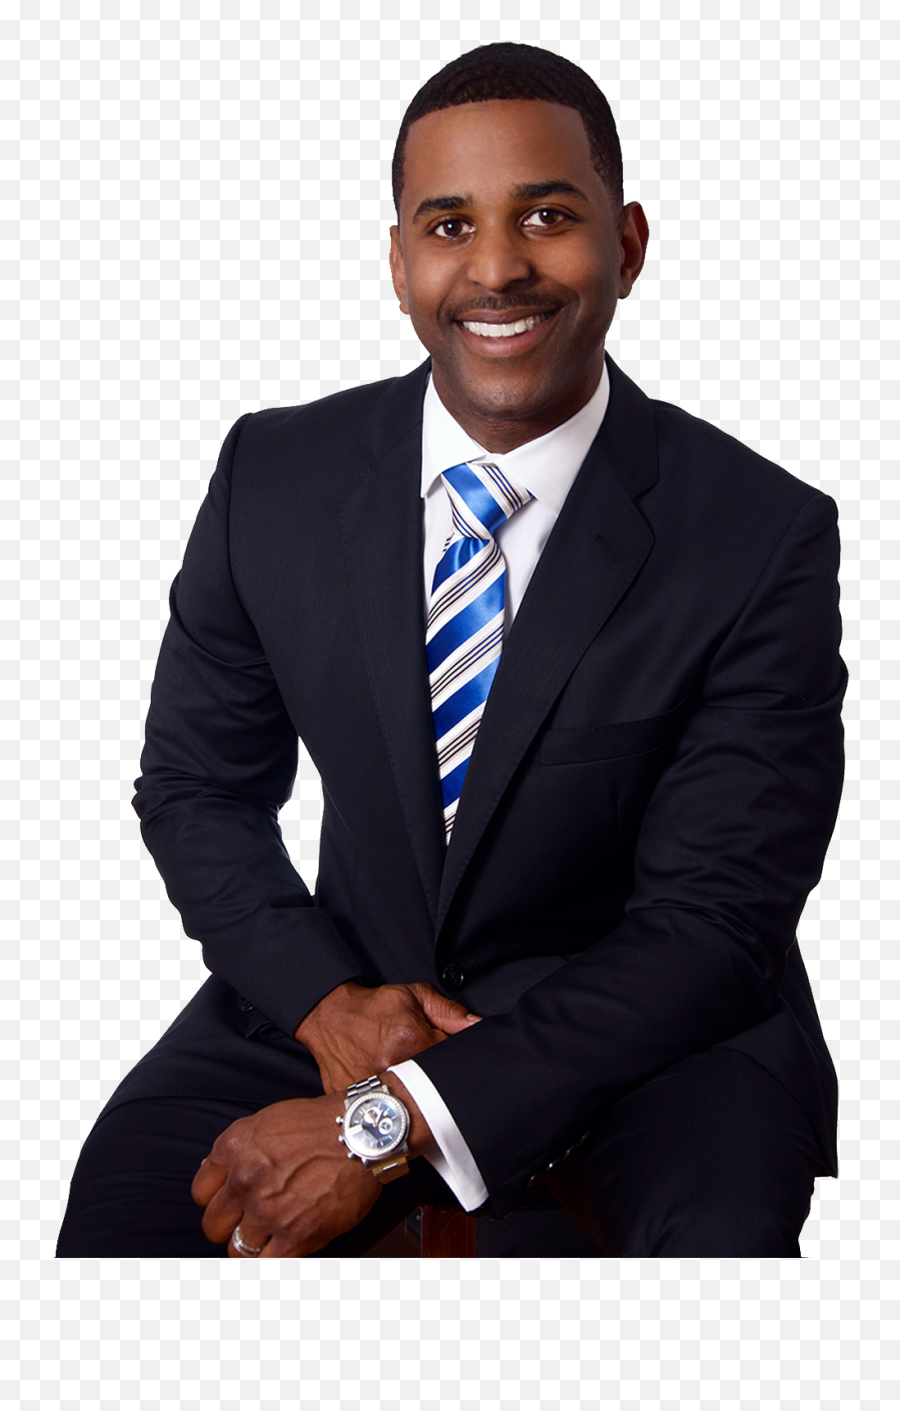 Download Business Man Png Image For Free - Black Man On Suit Png,Business Man Png